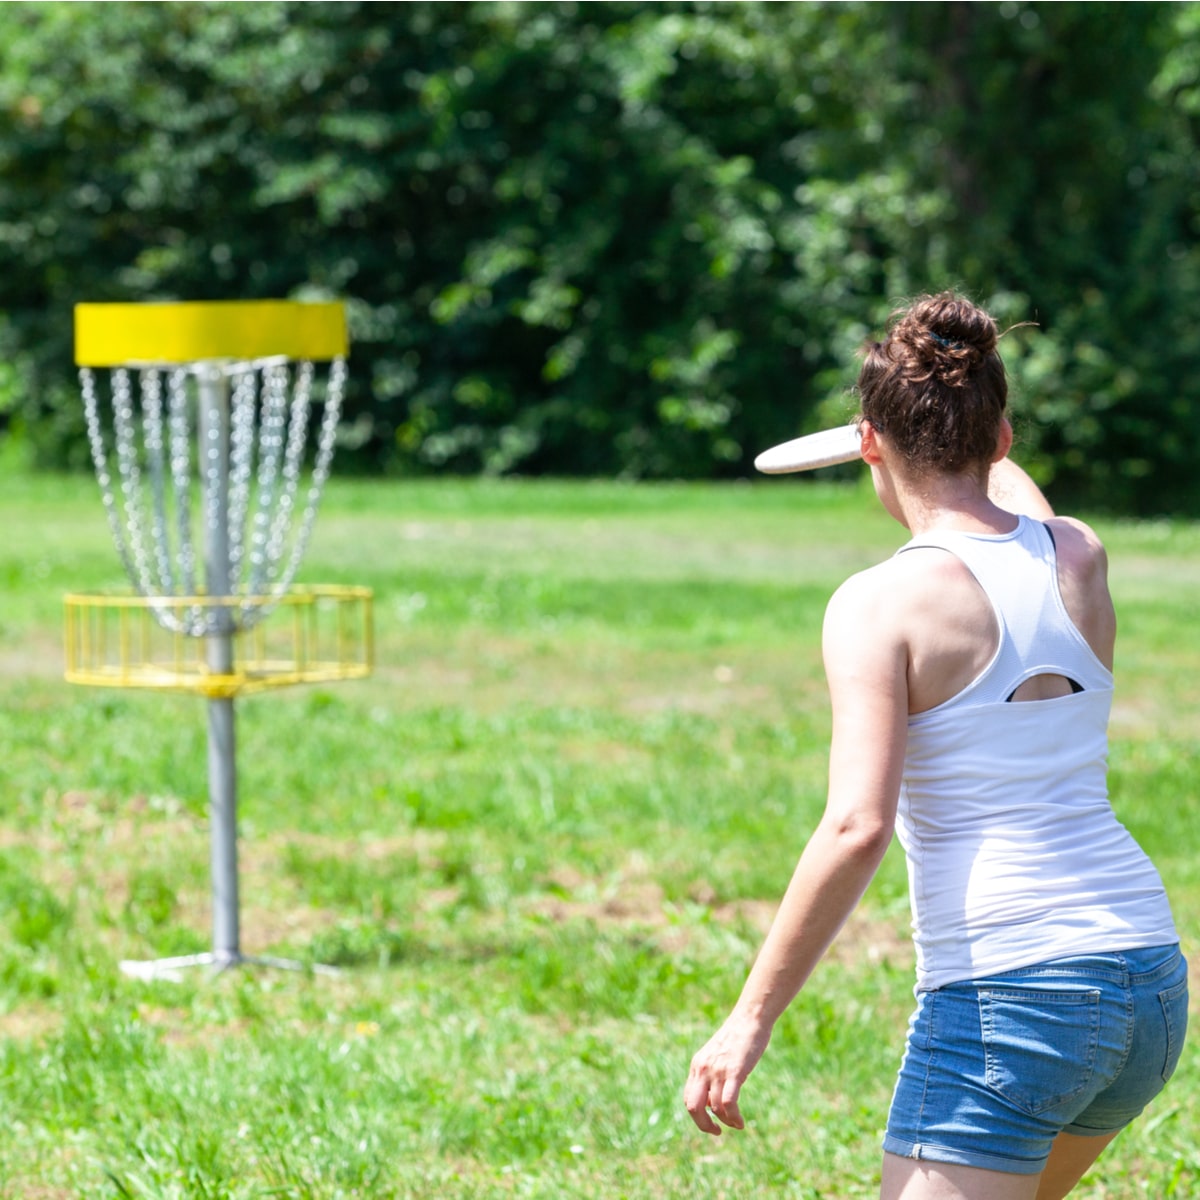 NATIONAL DISC GOLF DAY August 6, 2022